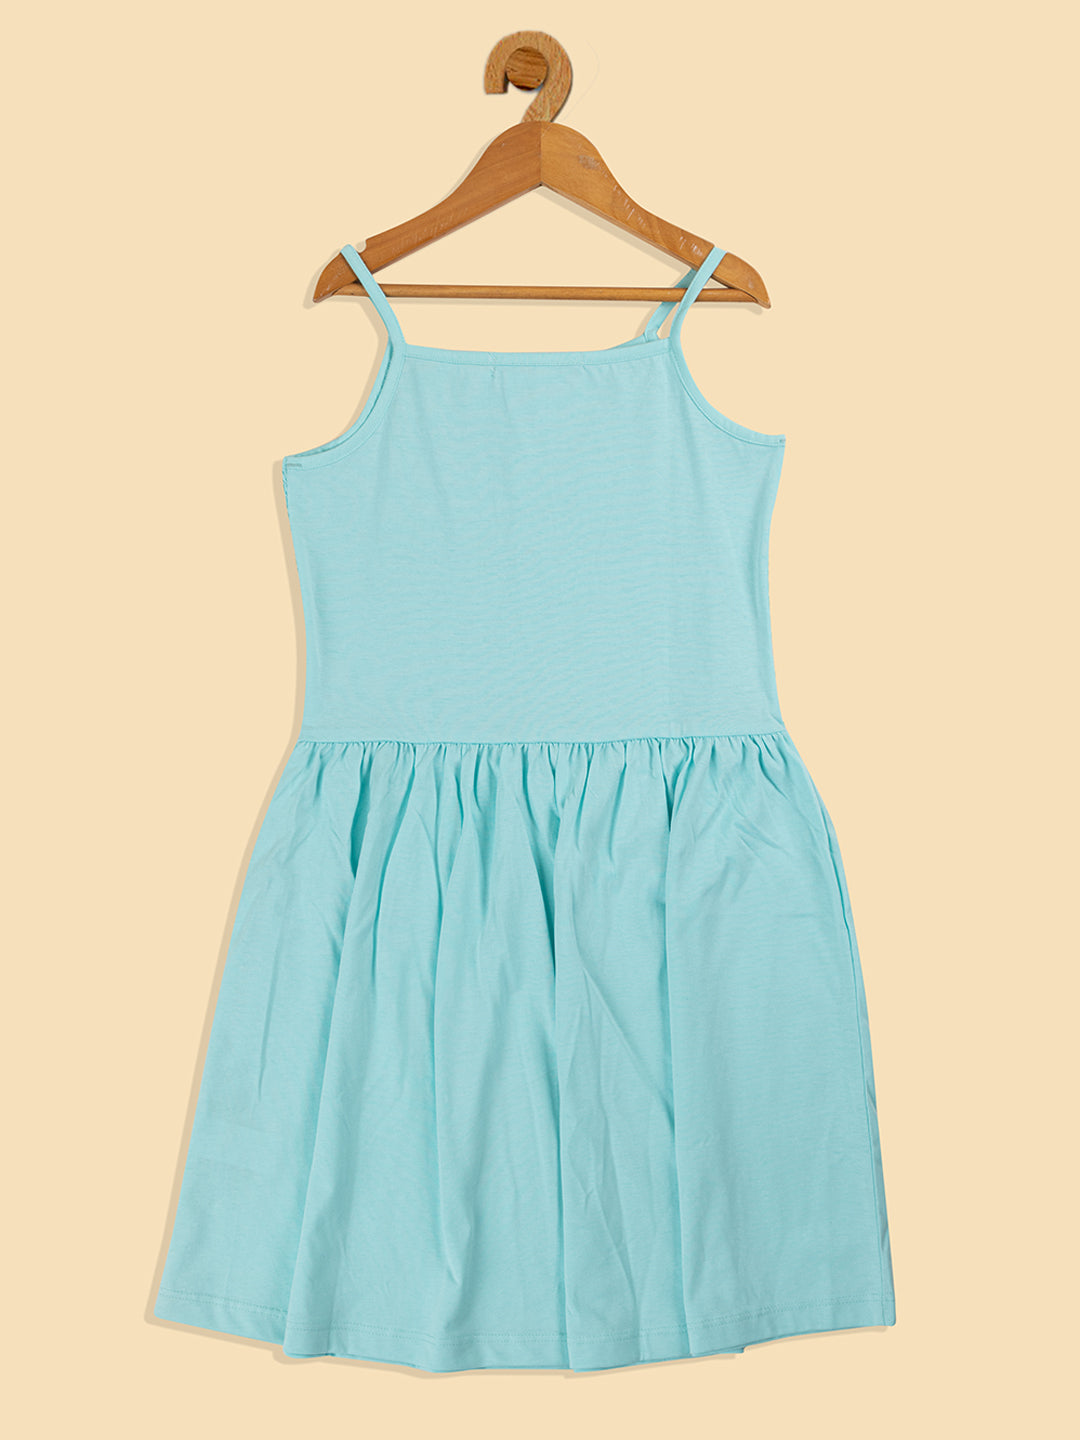 Pampolina  Solid Summer Cotton Dress For Baby Girl-Turquise